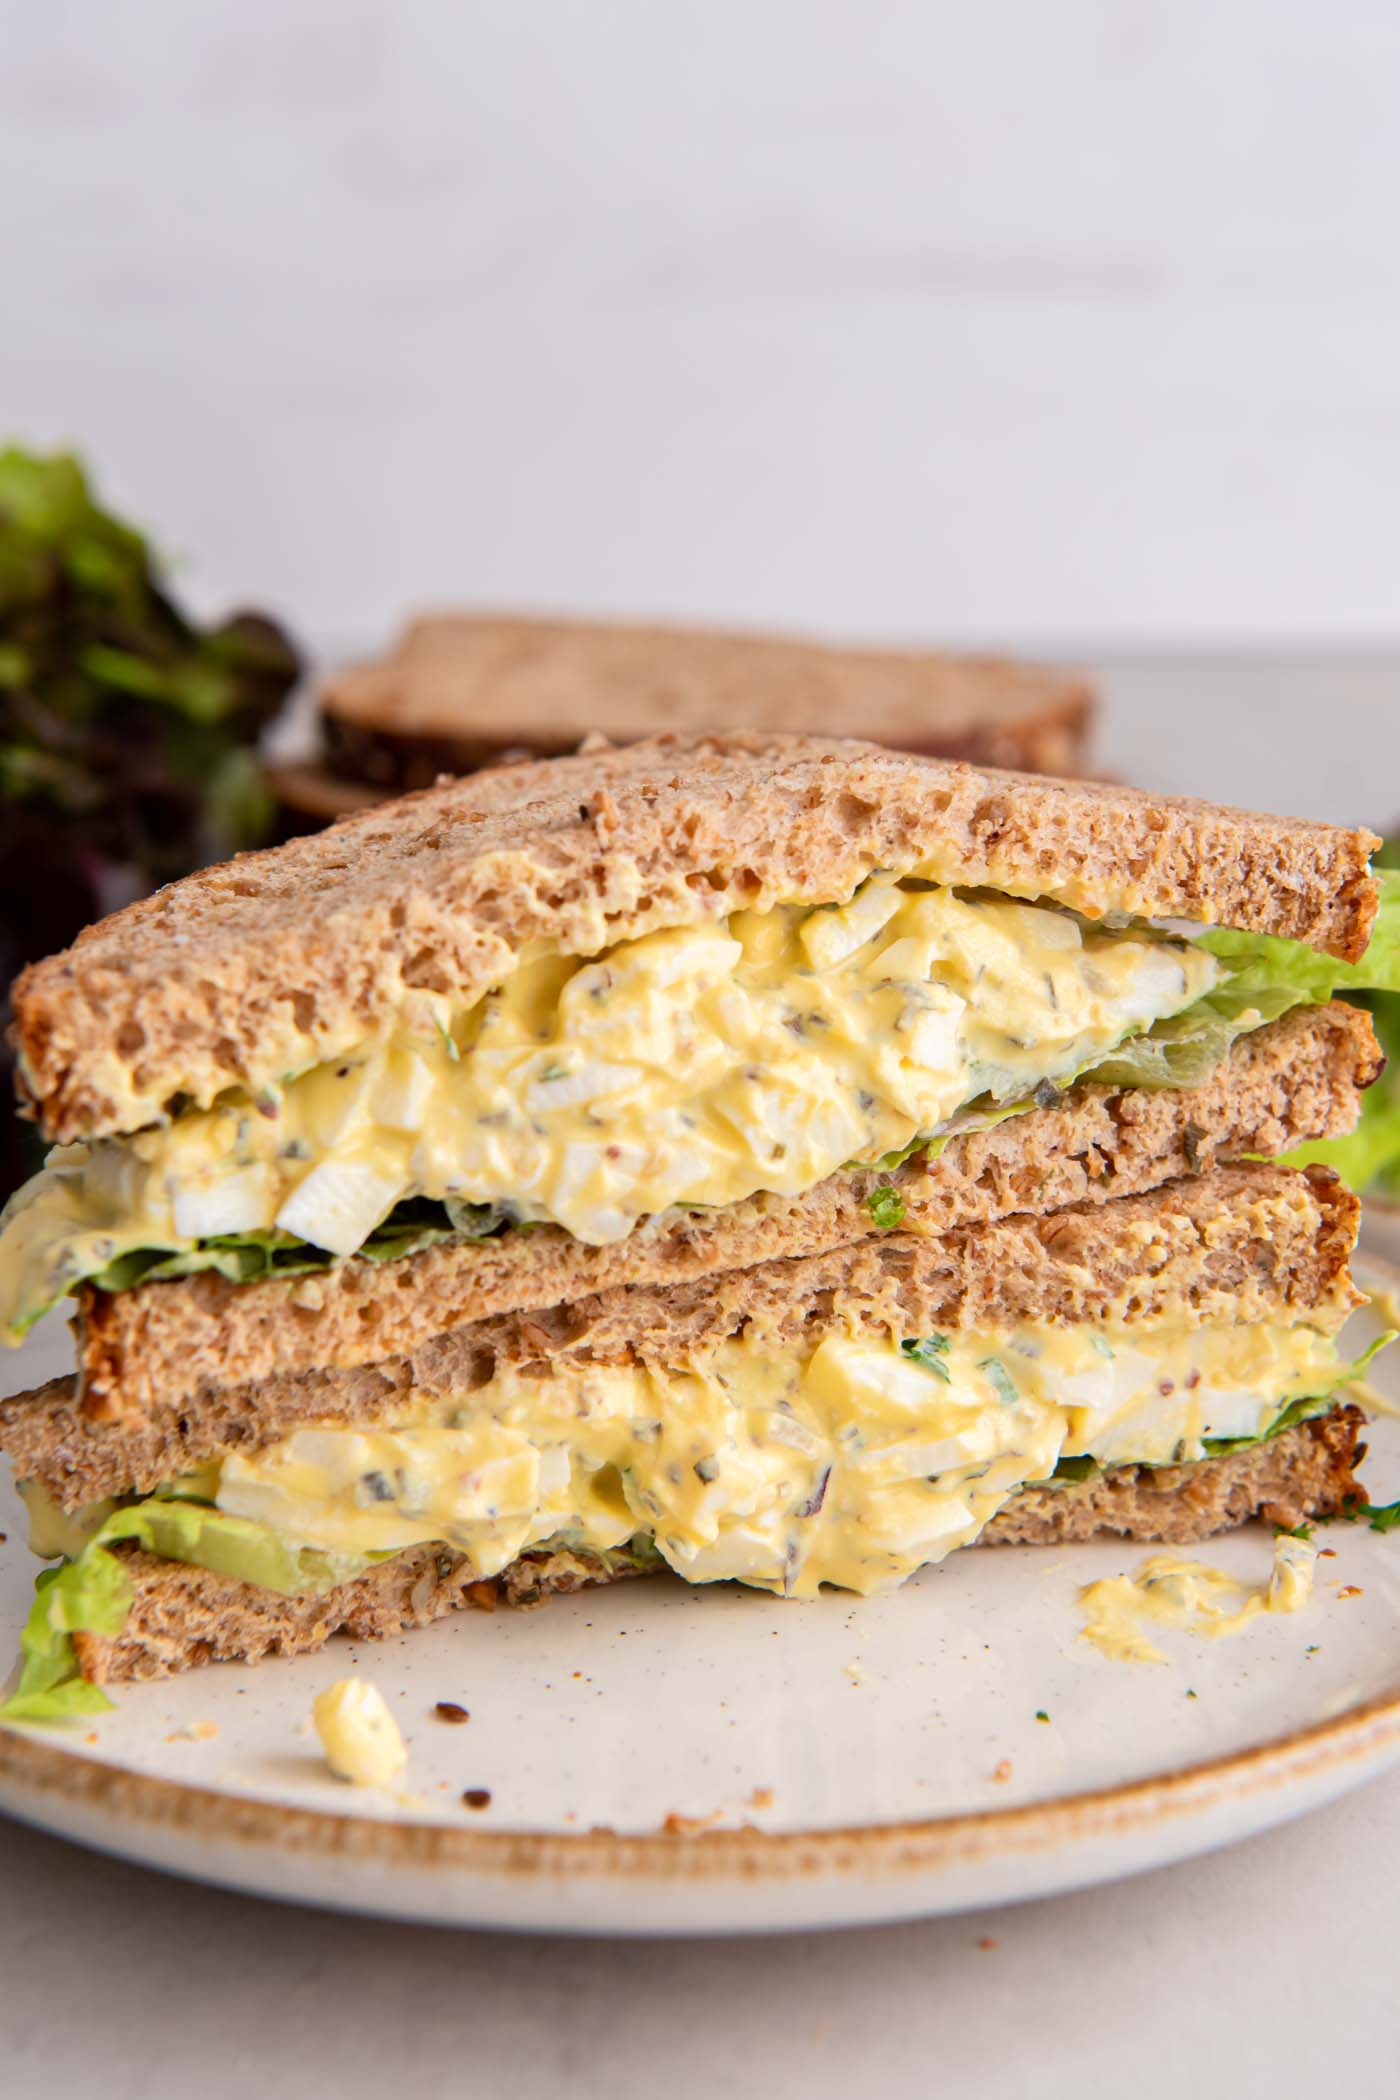 Two halves of egg salad sandwich stacked on top of each other on a plate.